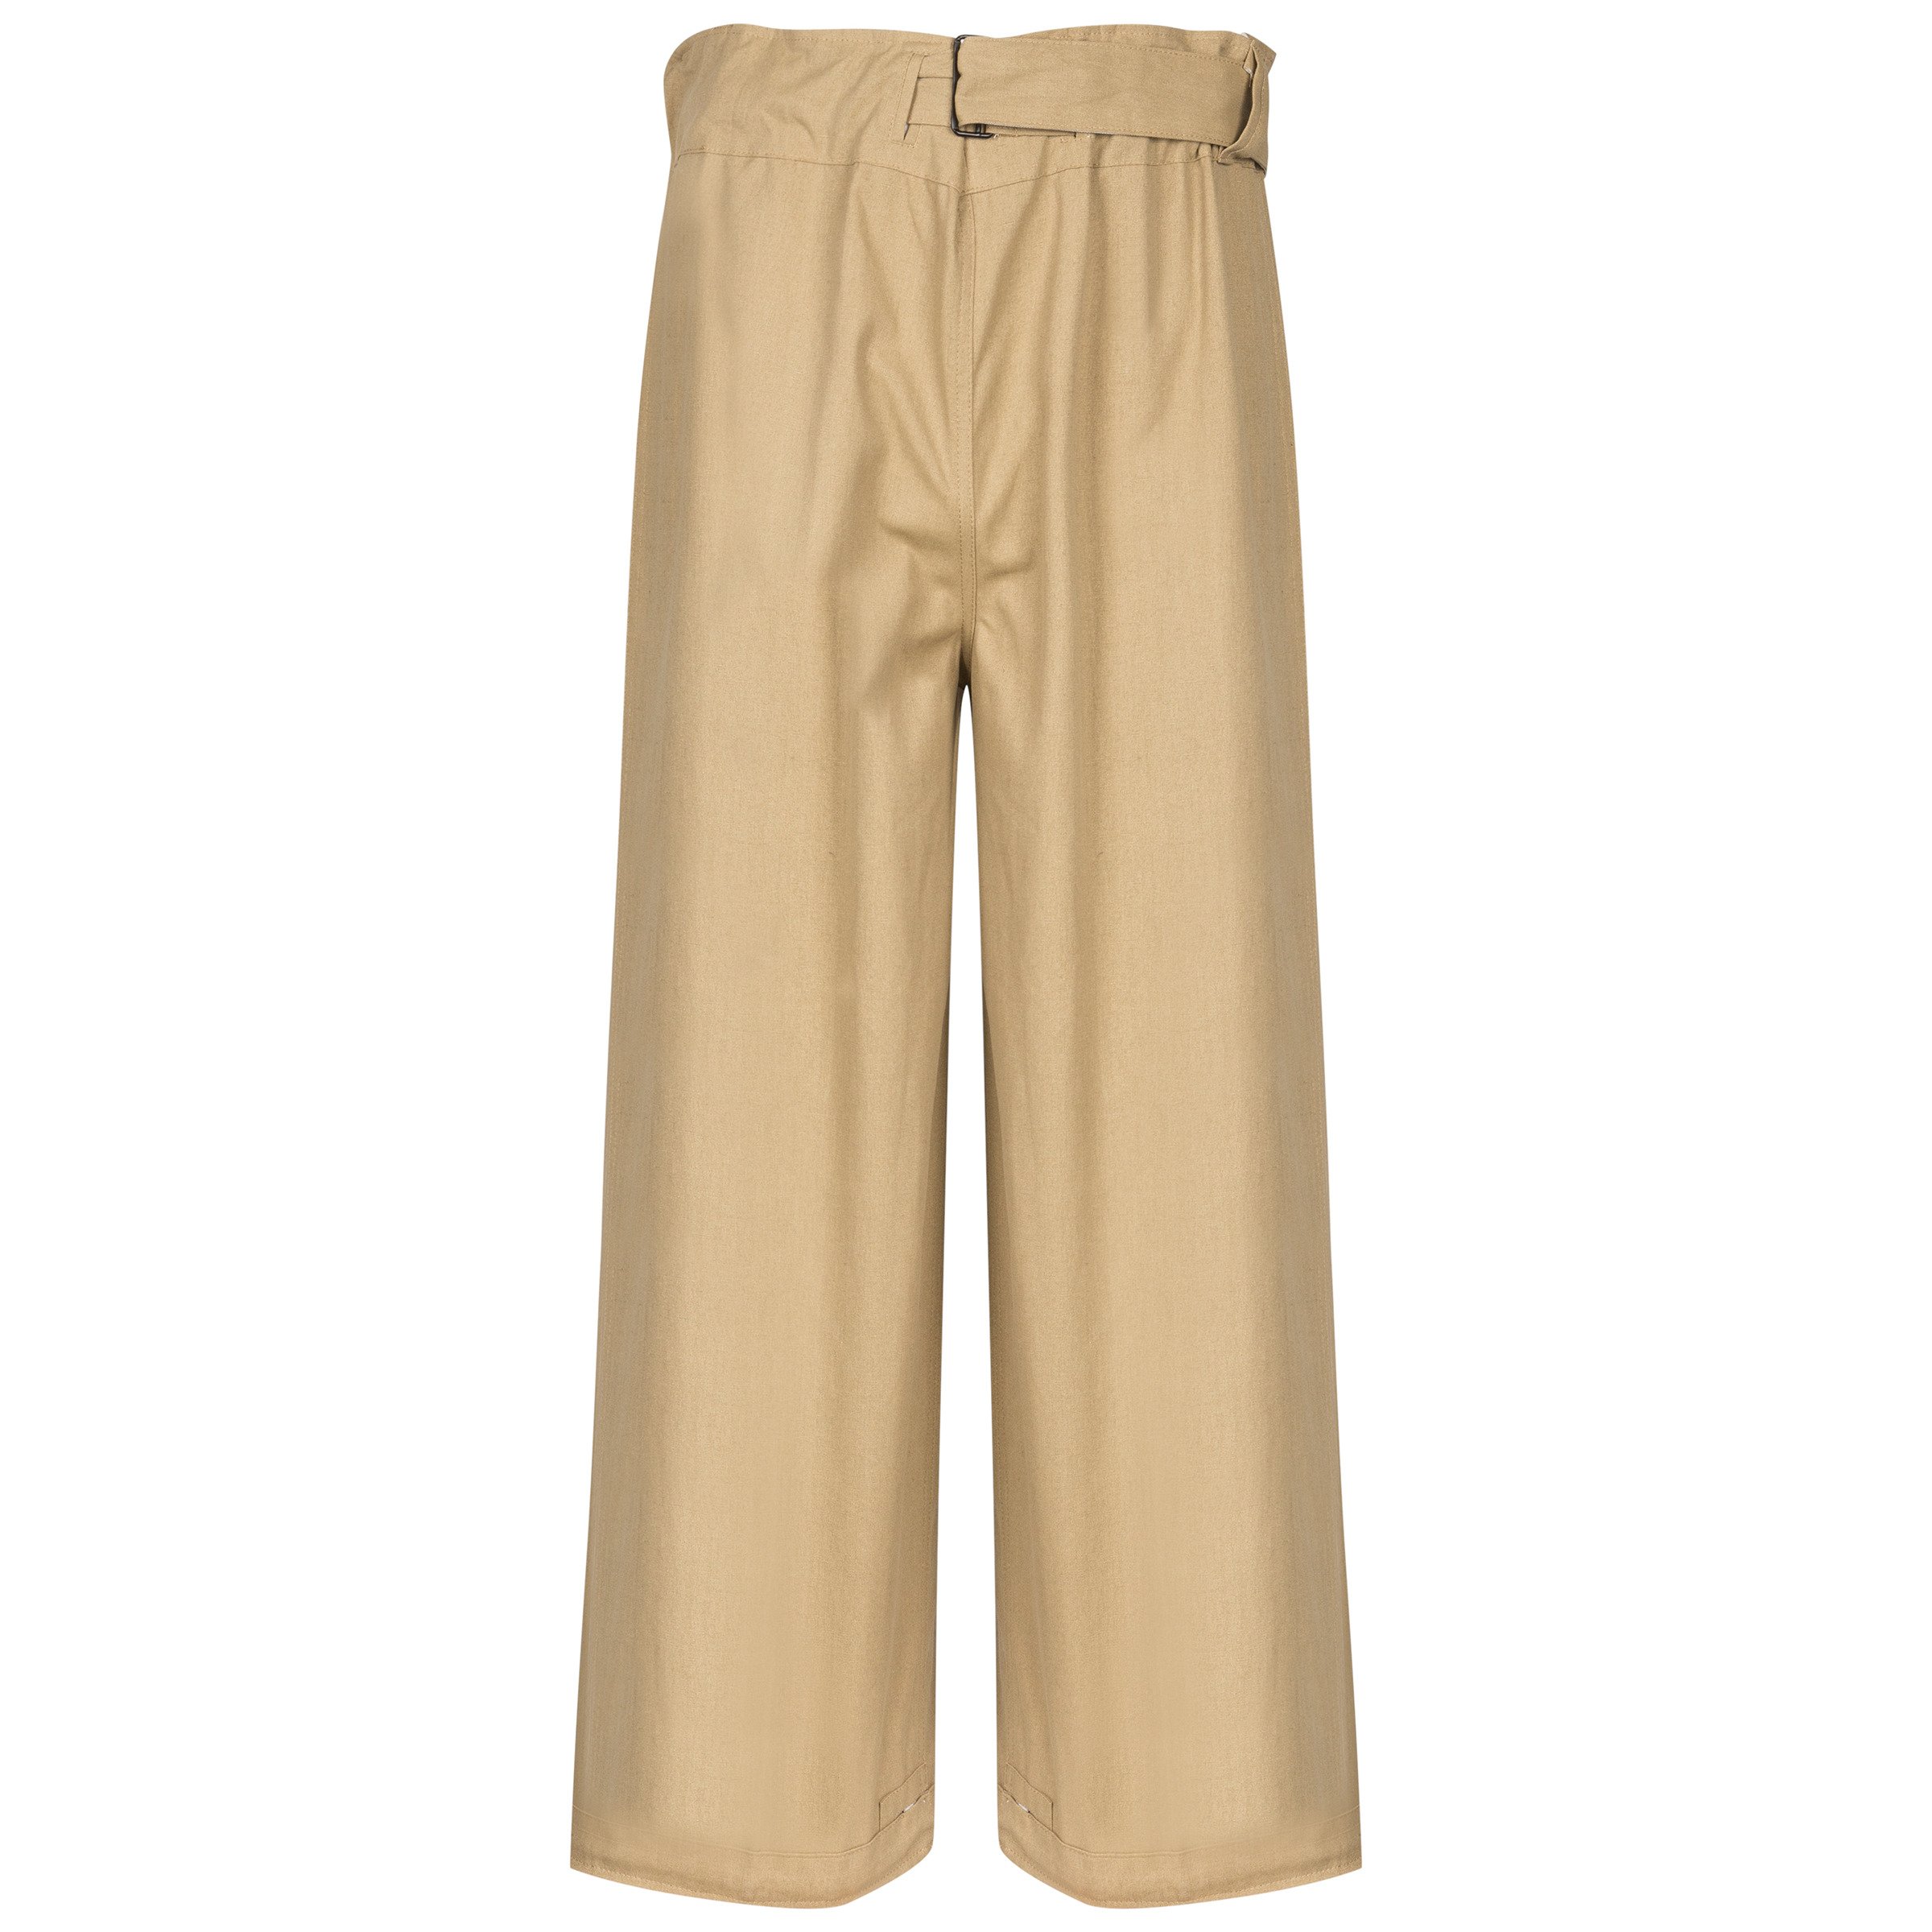 Windhose M42 - mountain troops trousers - repro S 74,75 € | Nestof.pl